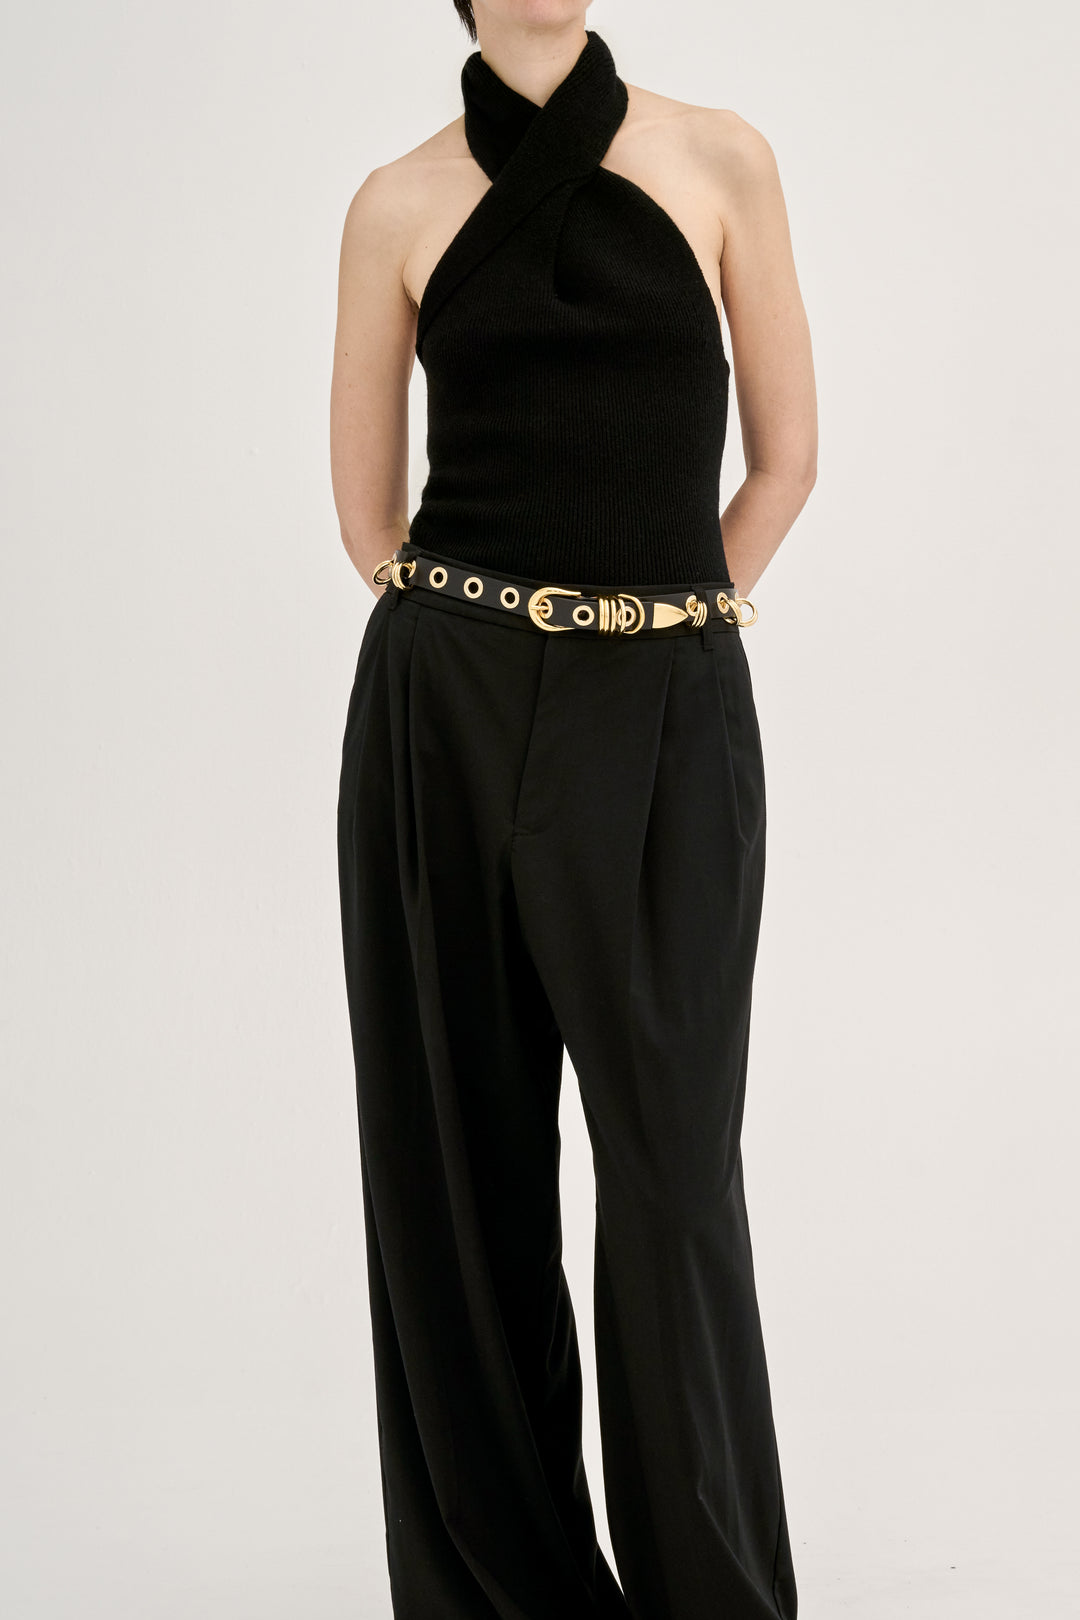 Model wearing Déhanche Revenge Gold black leather belt with gold grommets and buckle, styled with black trousers and a halter neck black top.